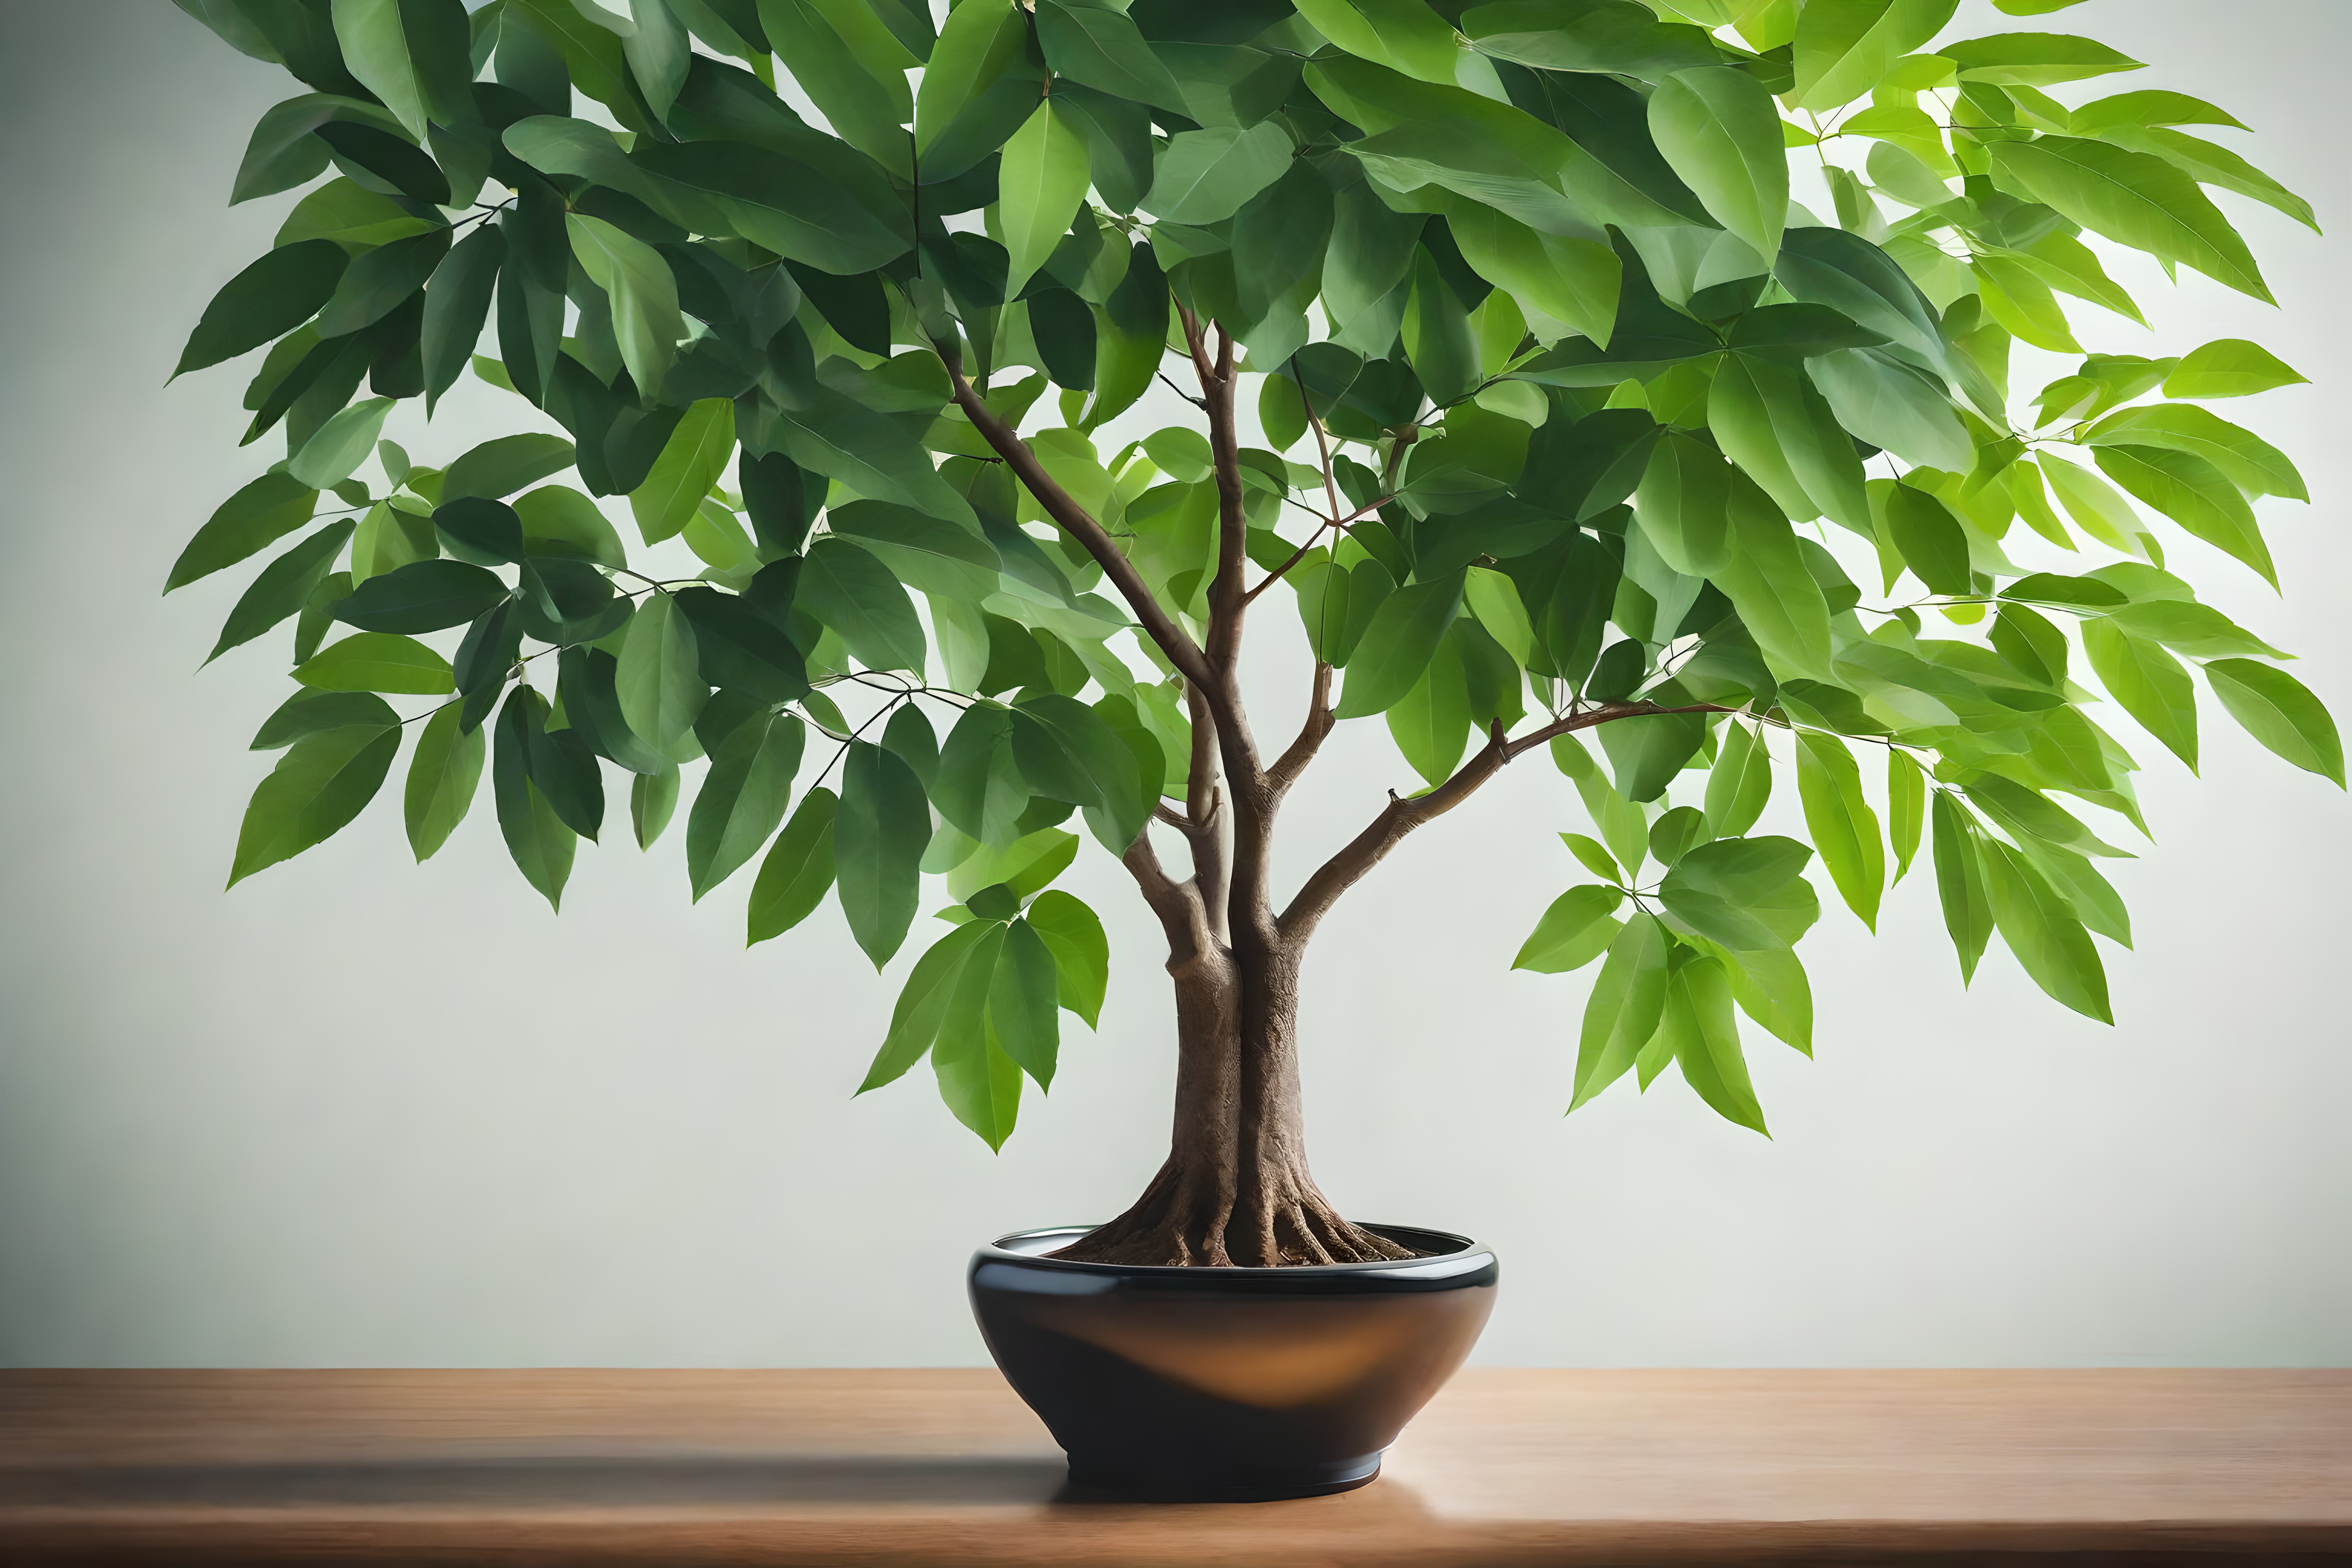 Money Tree Plant: Symbolizing prosperity, this easy-to-grow plant with braided stems adds charm to your bedroom decor.